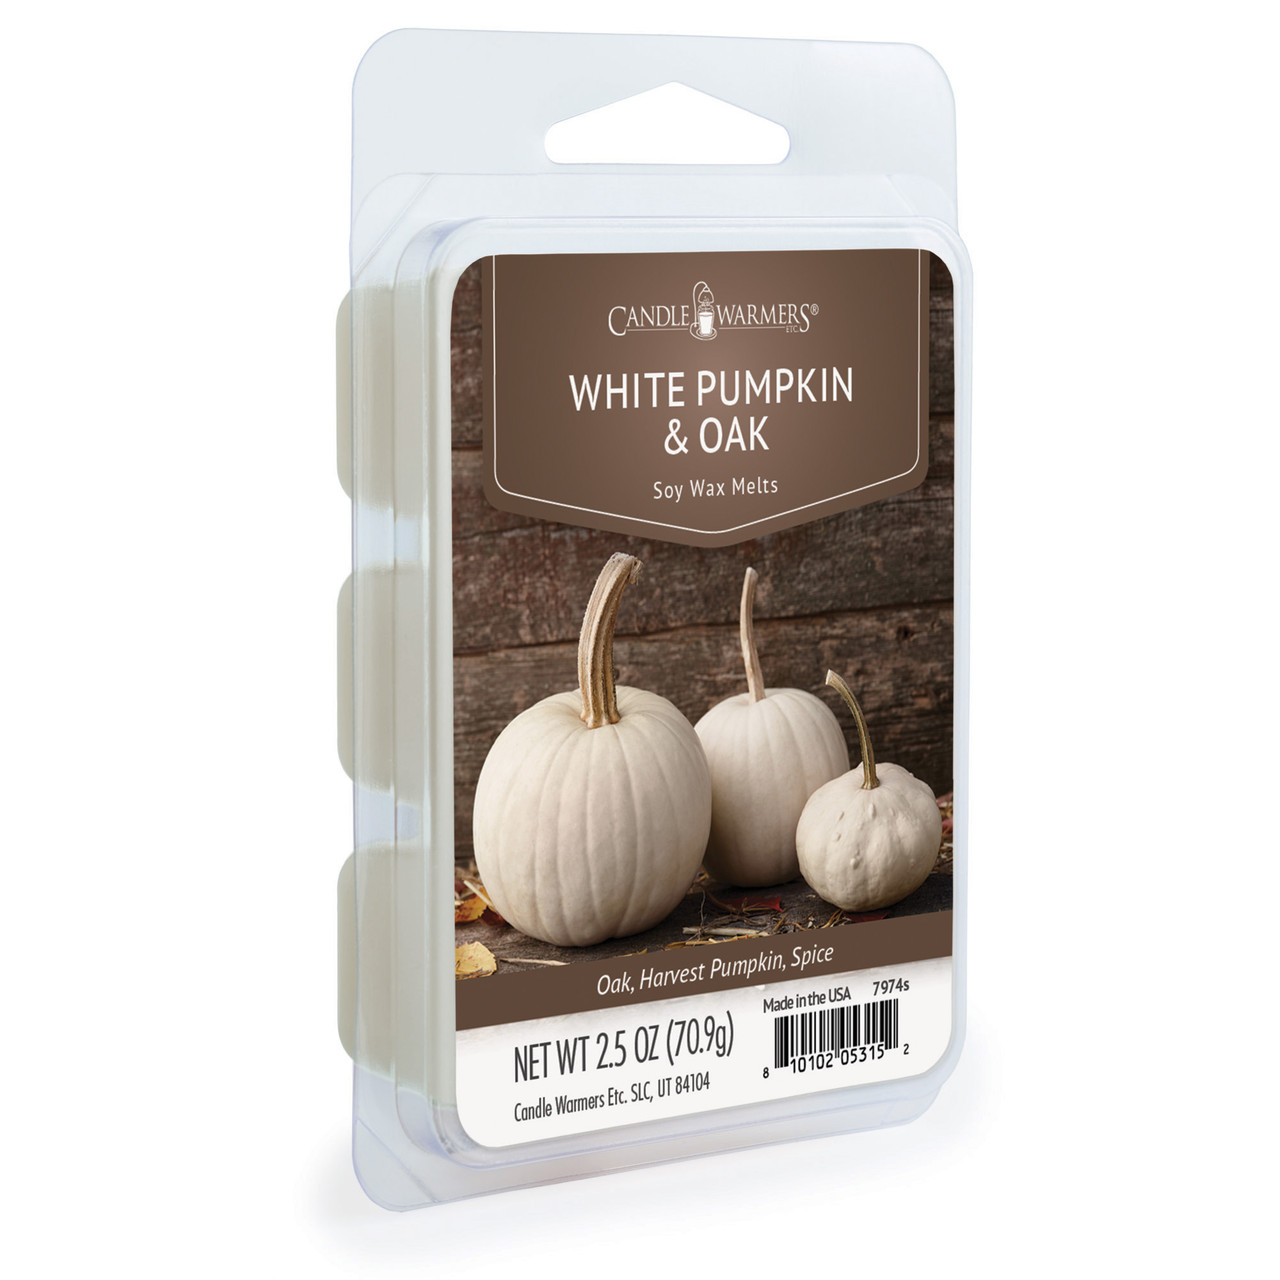 Nordic Night Wax Melts by Candlecopia®, 2 Pack